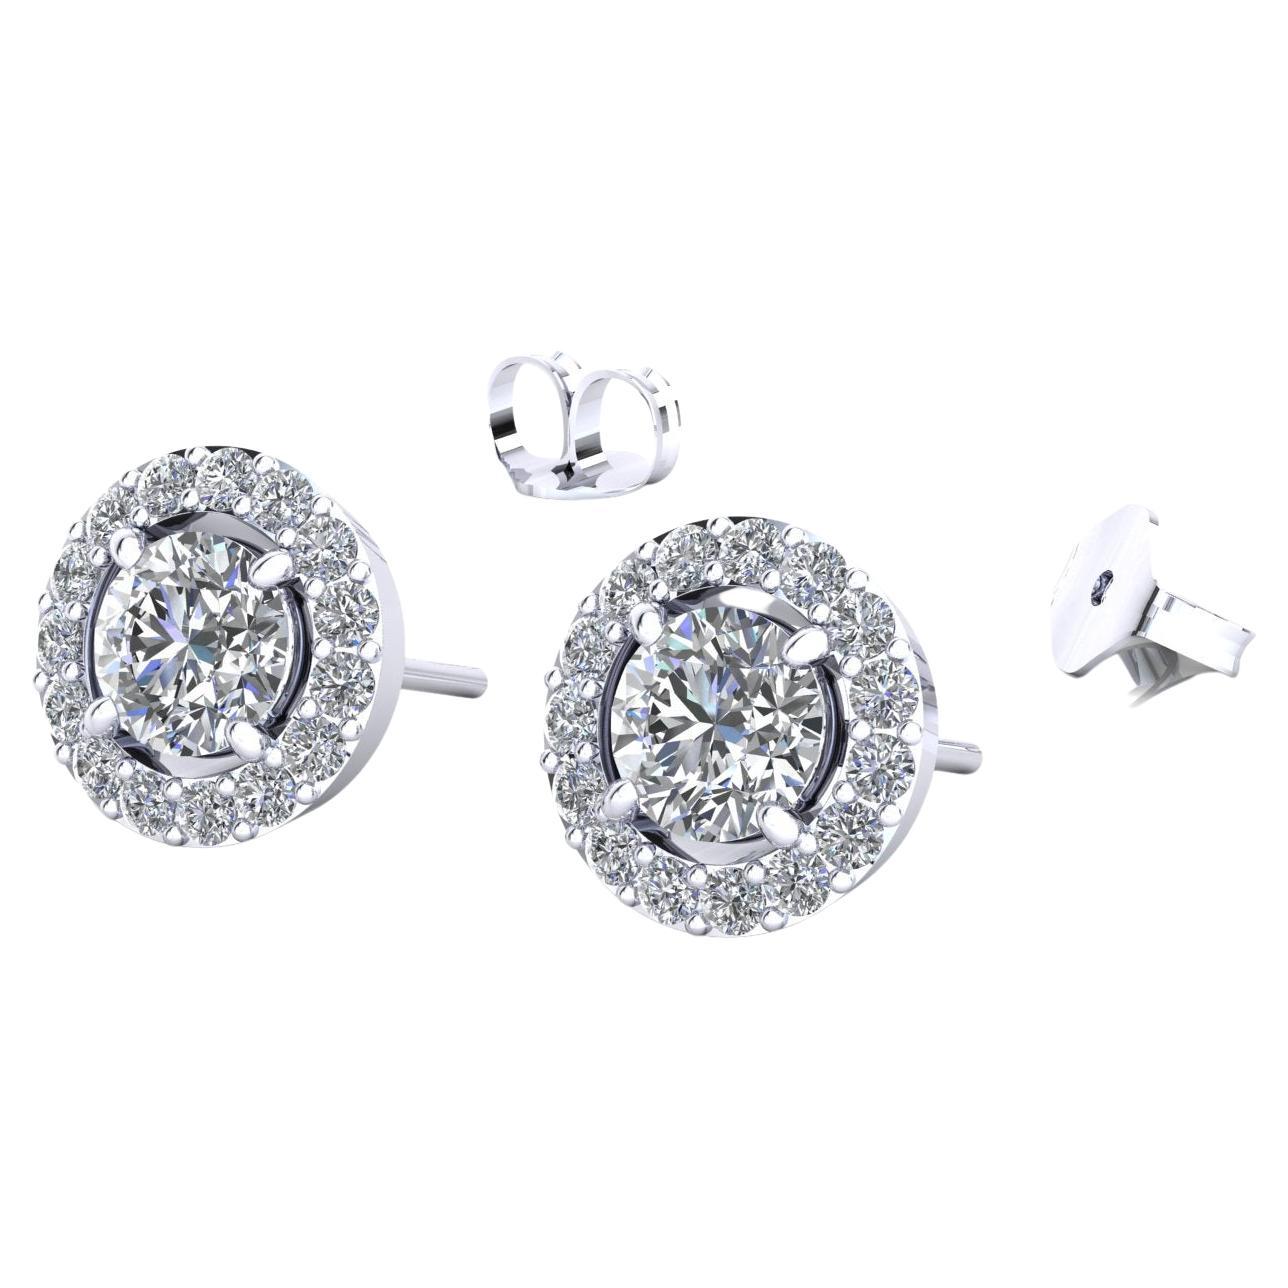 Special Earrings "Circle" with Certificate Natural Diamonds, 18kt Gold For Sale